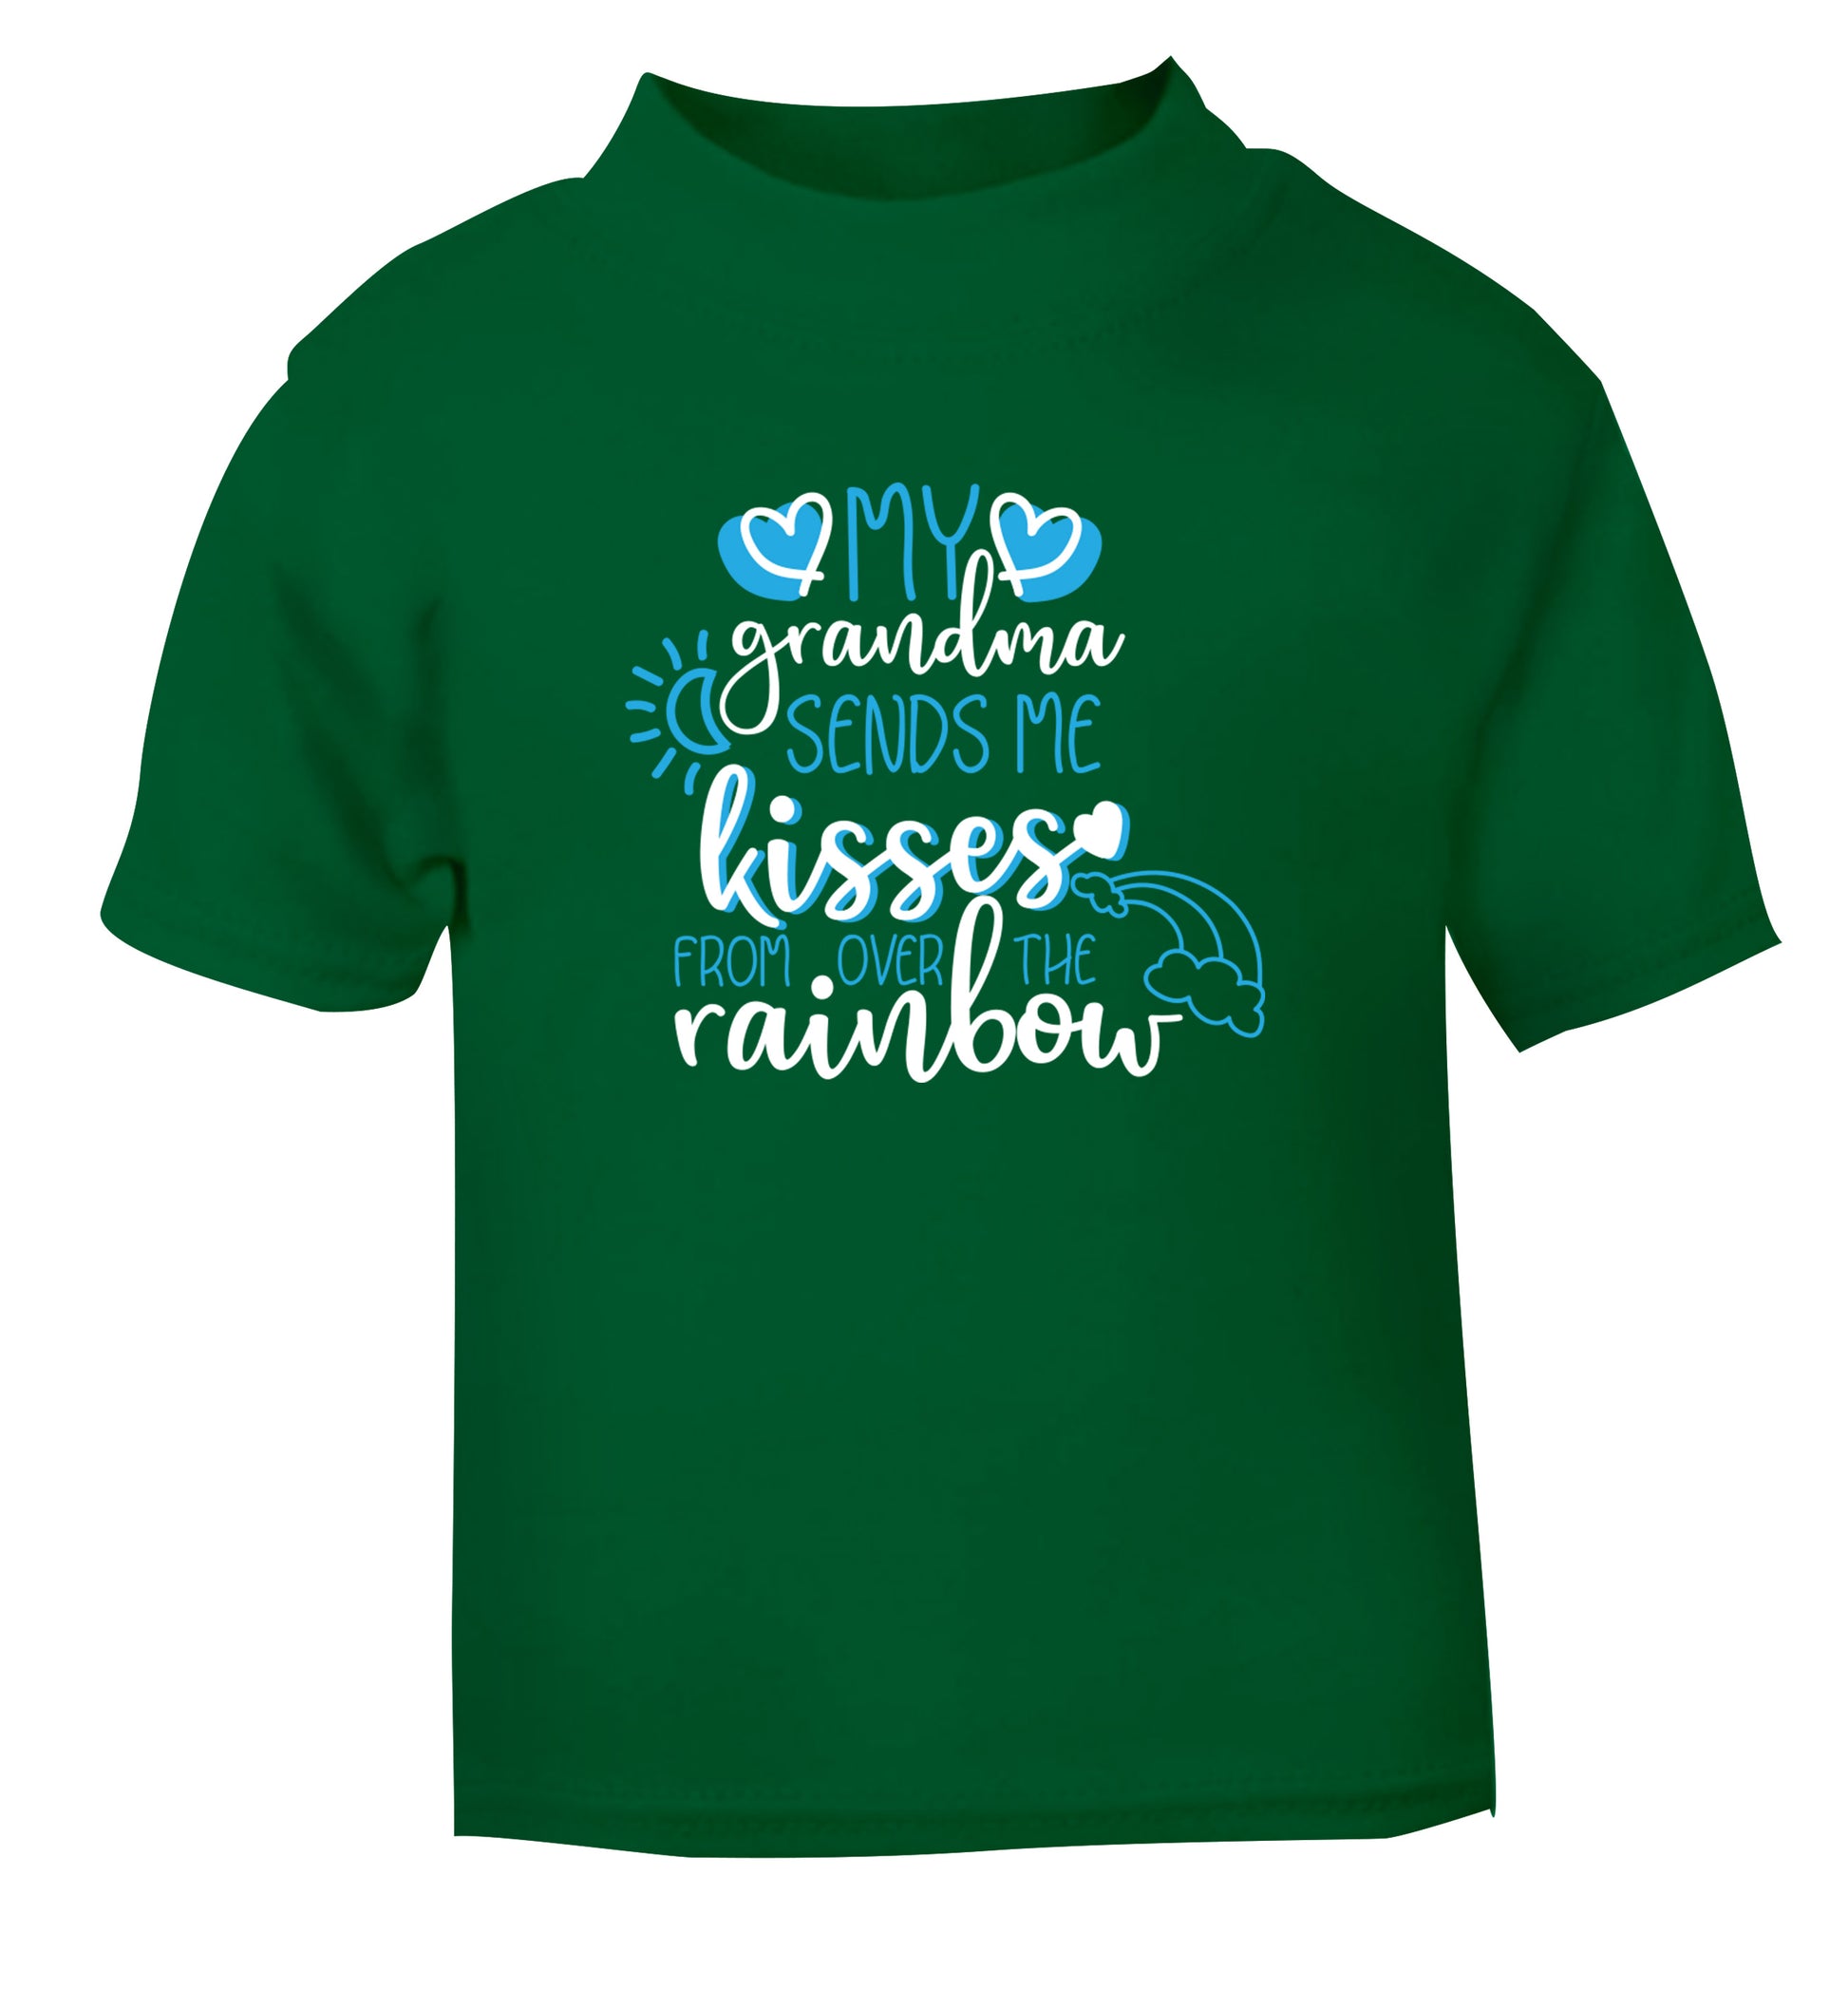 My grandma sends me kisses from over the rainbow green Baby Toddler Tshirt 2 Years